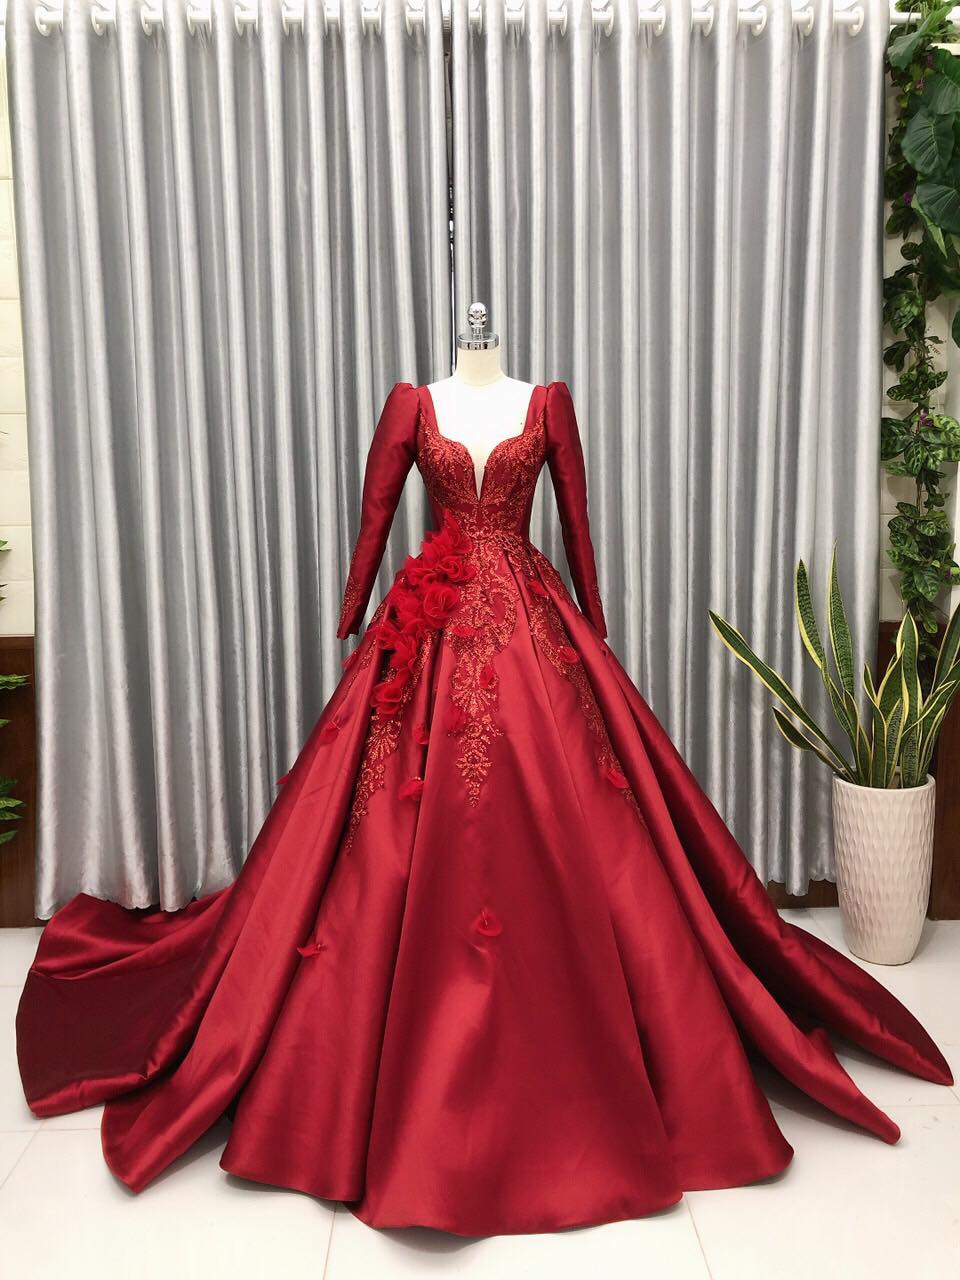 Extravagant red satin gown wedding/prom dress with red flower and glitter details